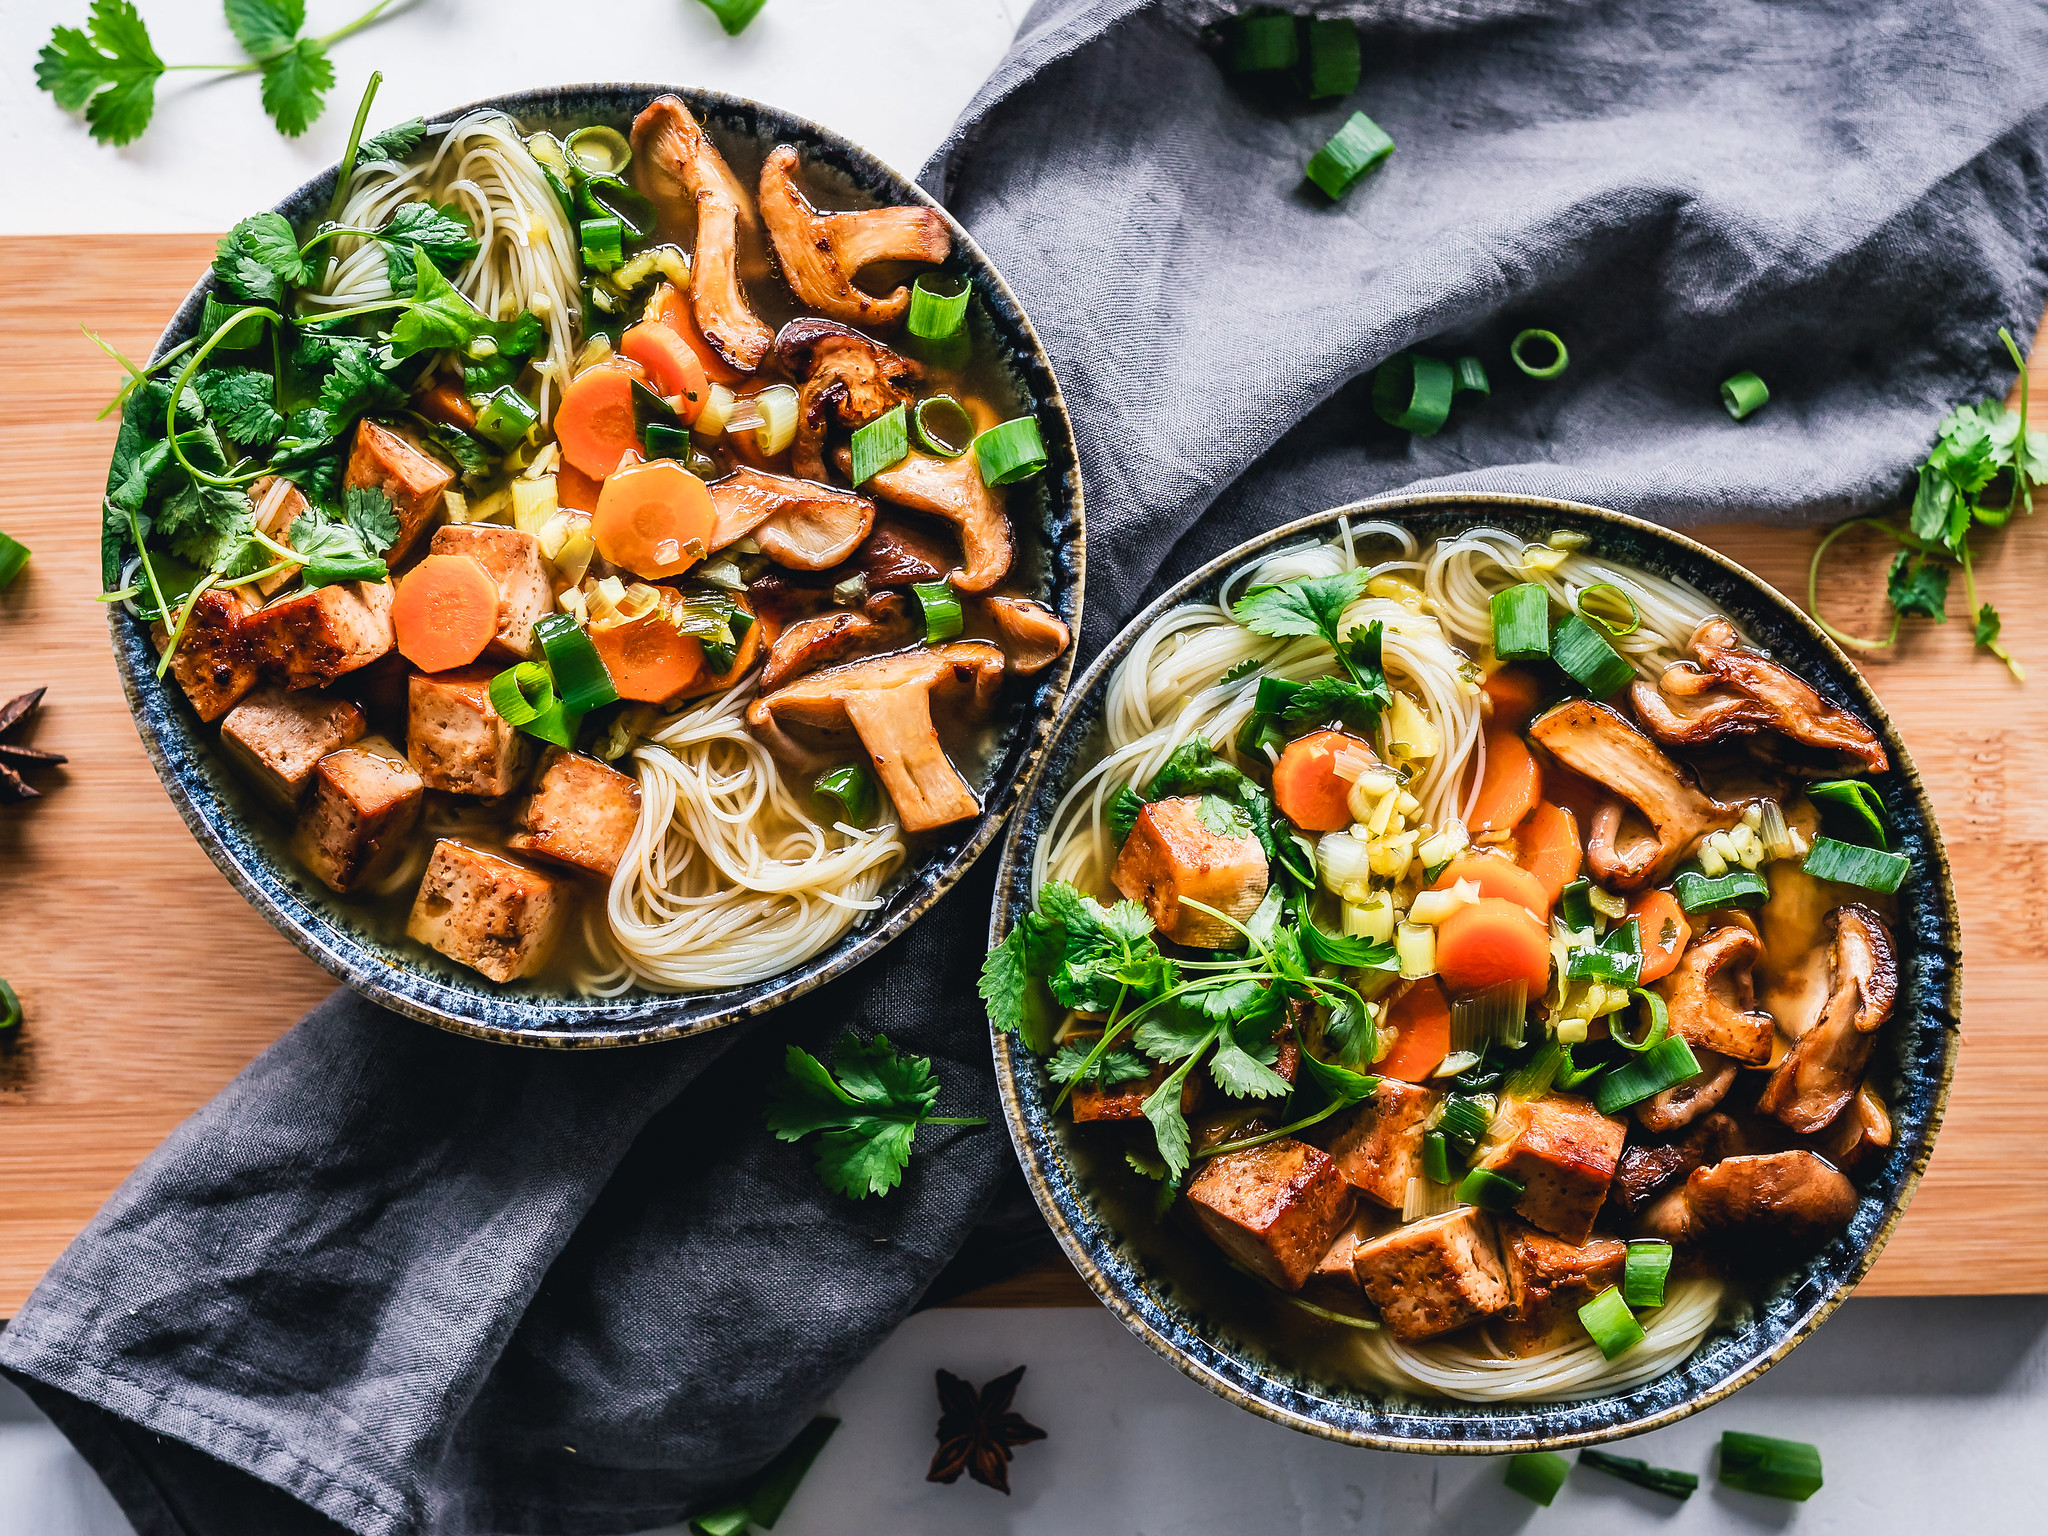 Spicy Eggplant and Tofu Bowls